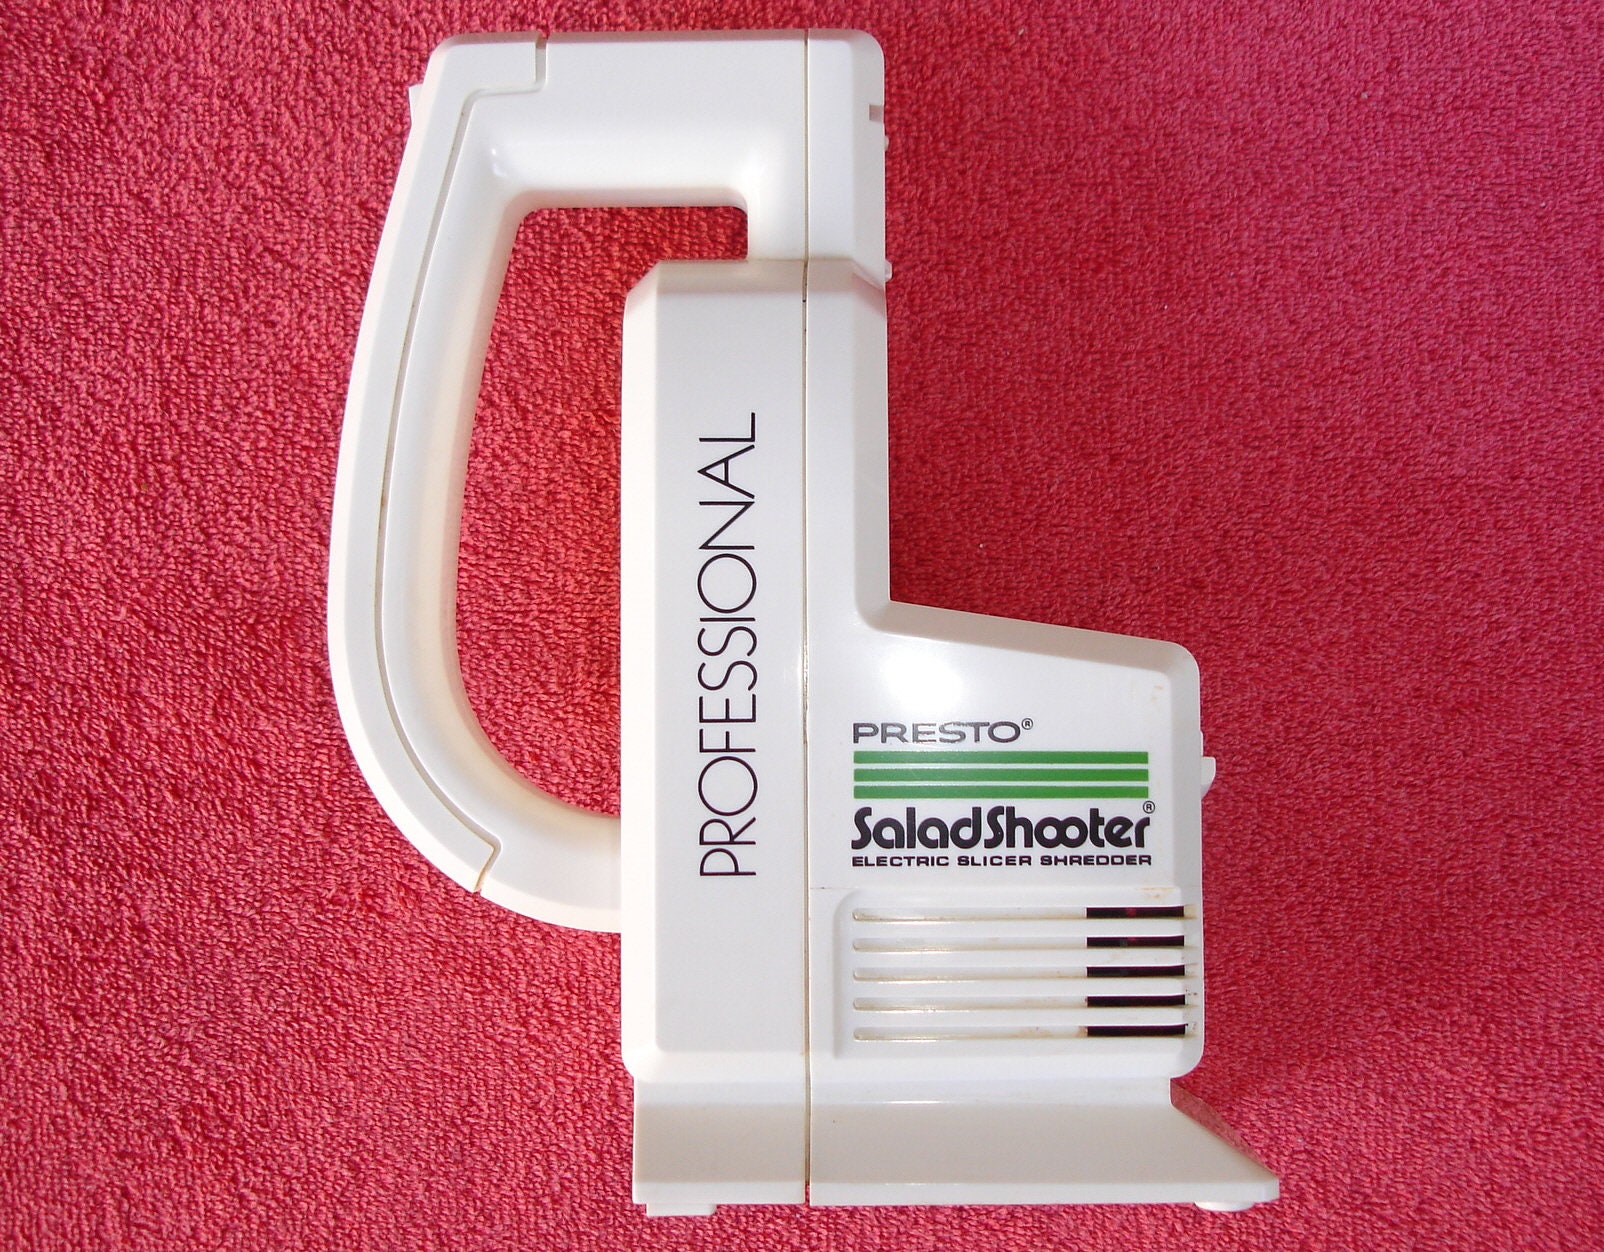 Presto Professional SaladShooter, Country Home Products